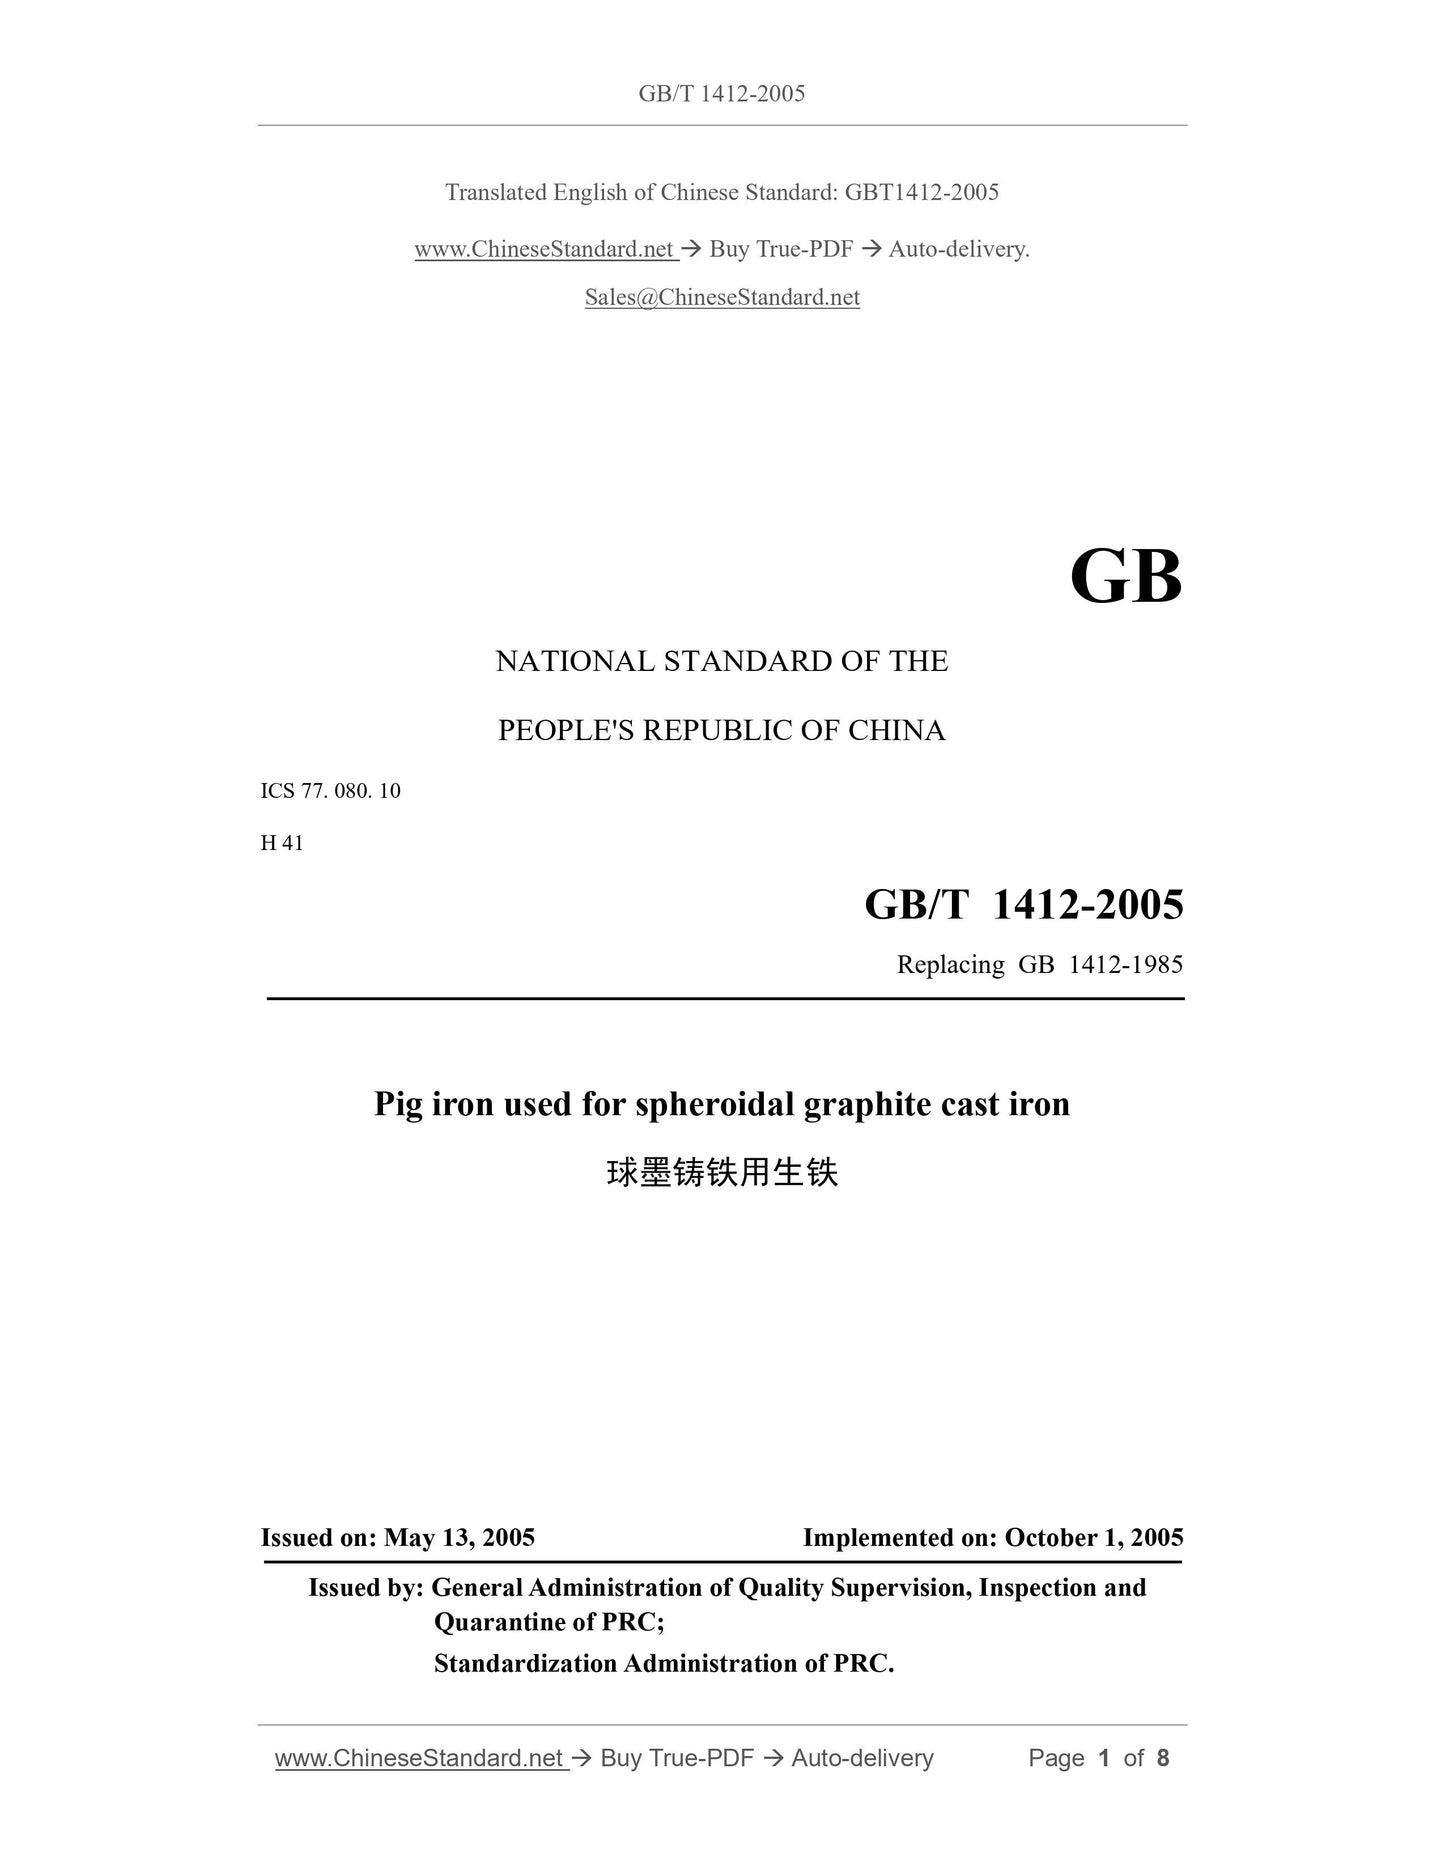 GB/T 1412-2005 Page 1